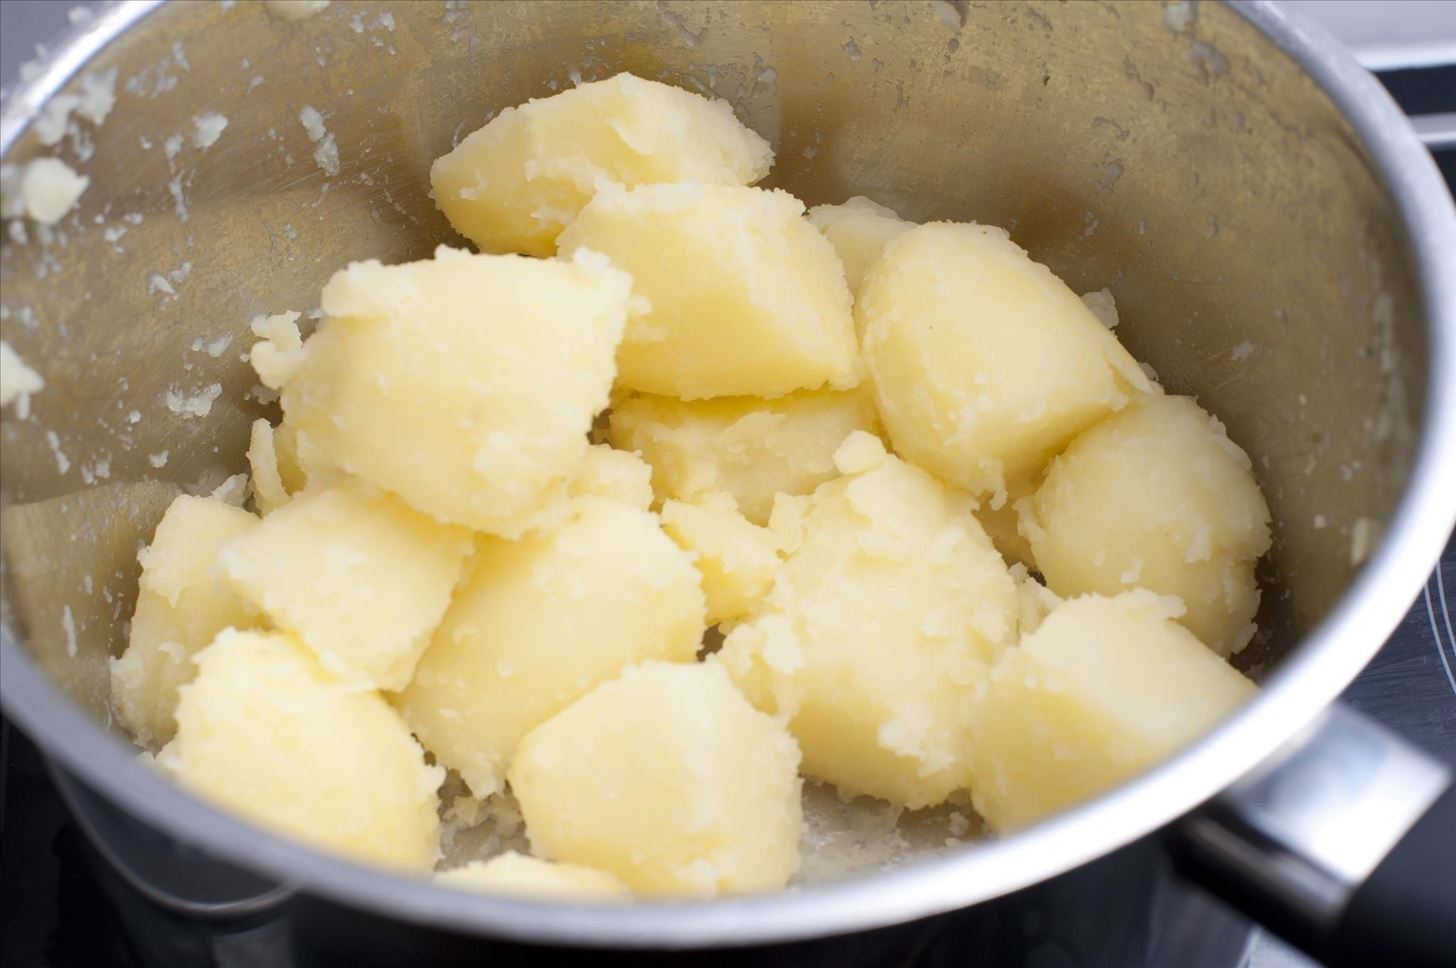 How to Make Perfectly Fluffy Mashed Potatoes Without Adding More Butter or Milk